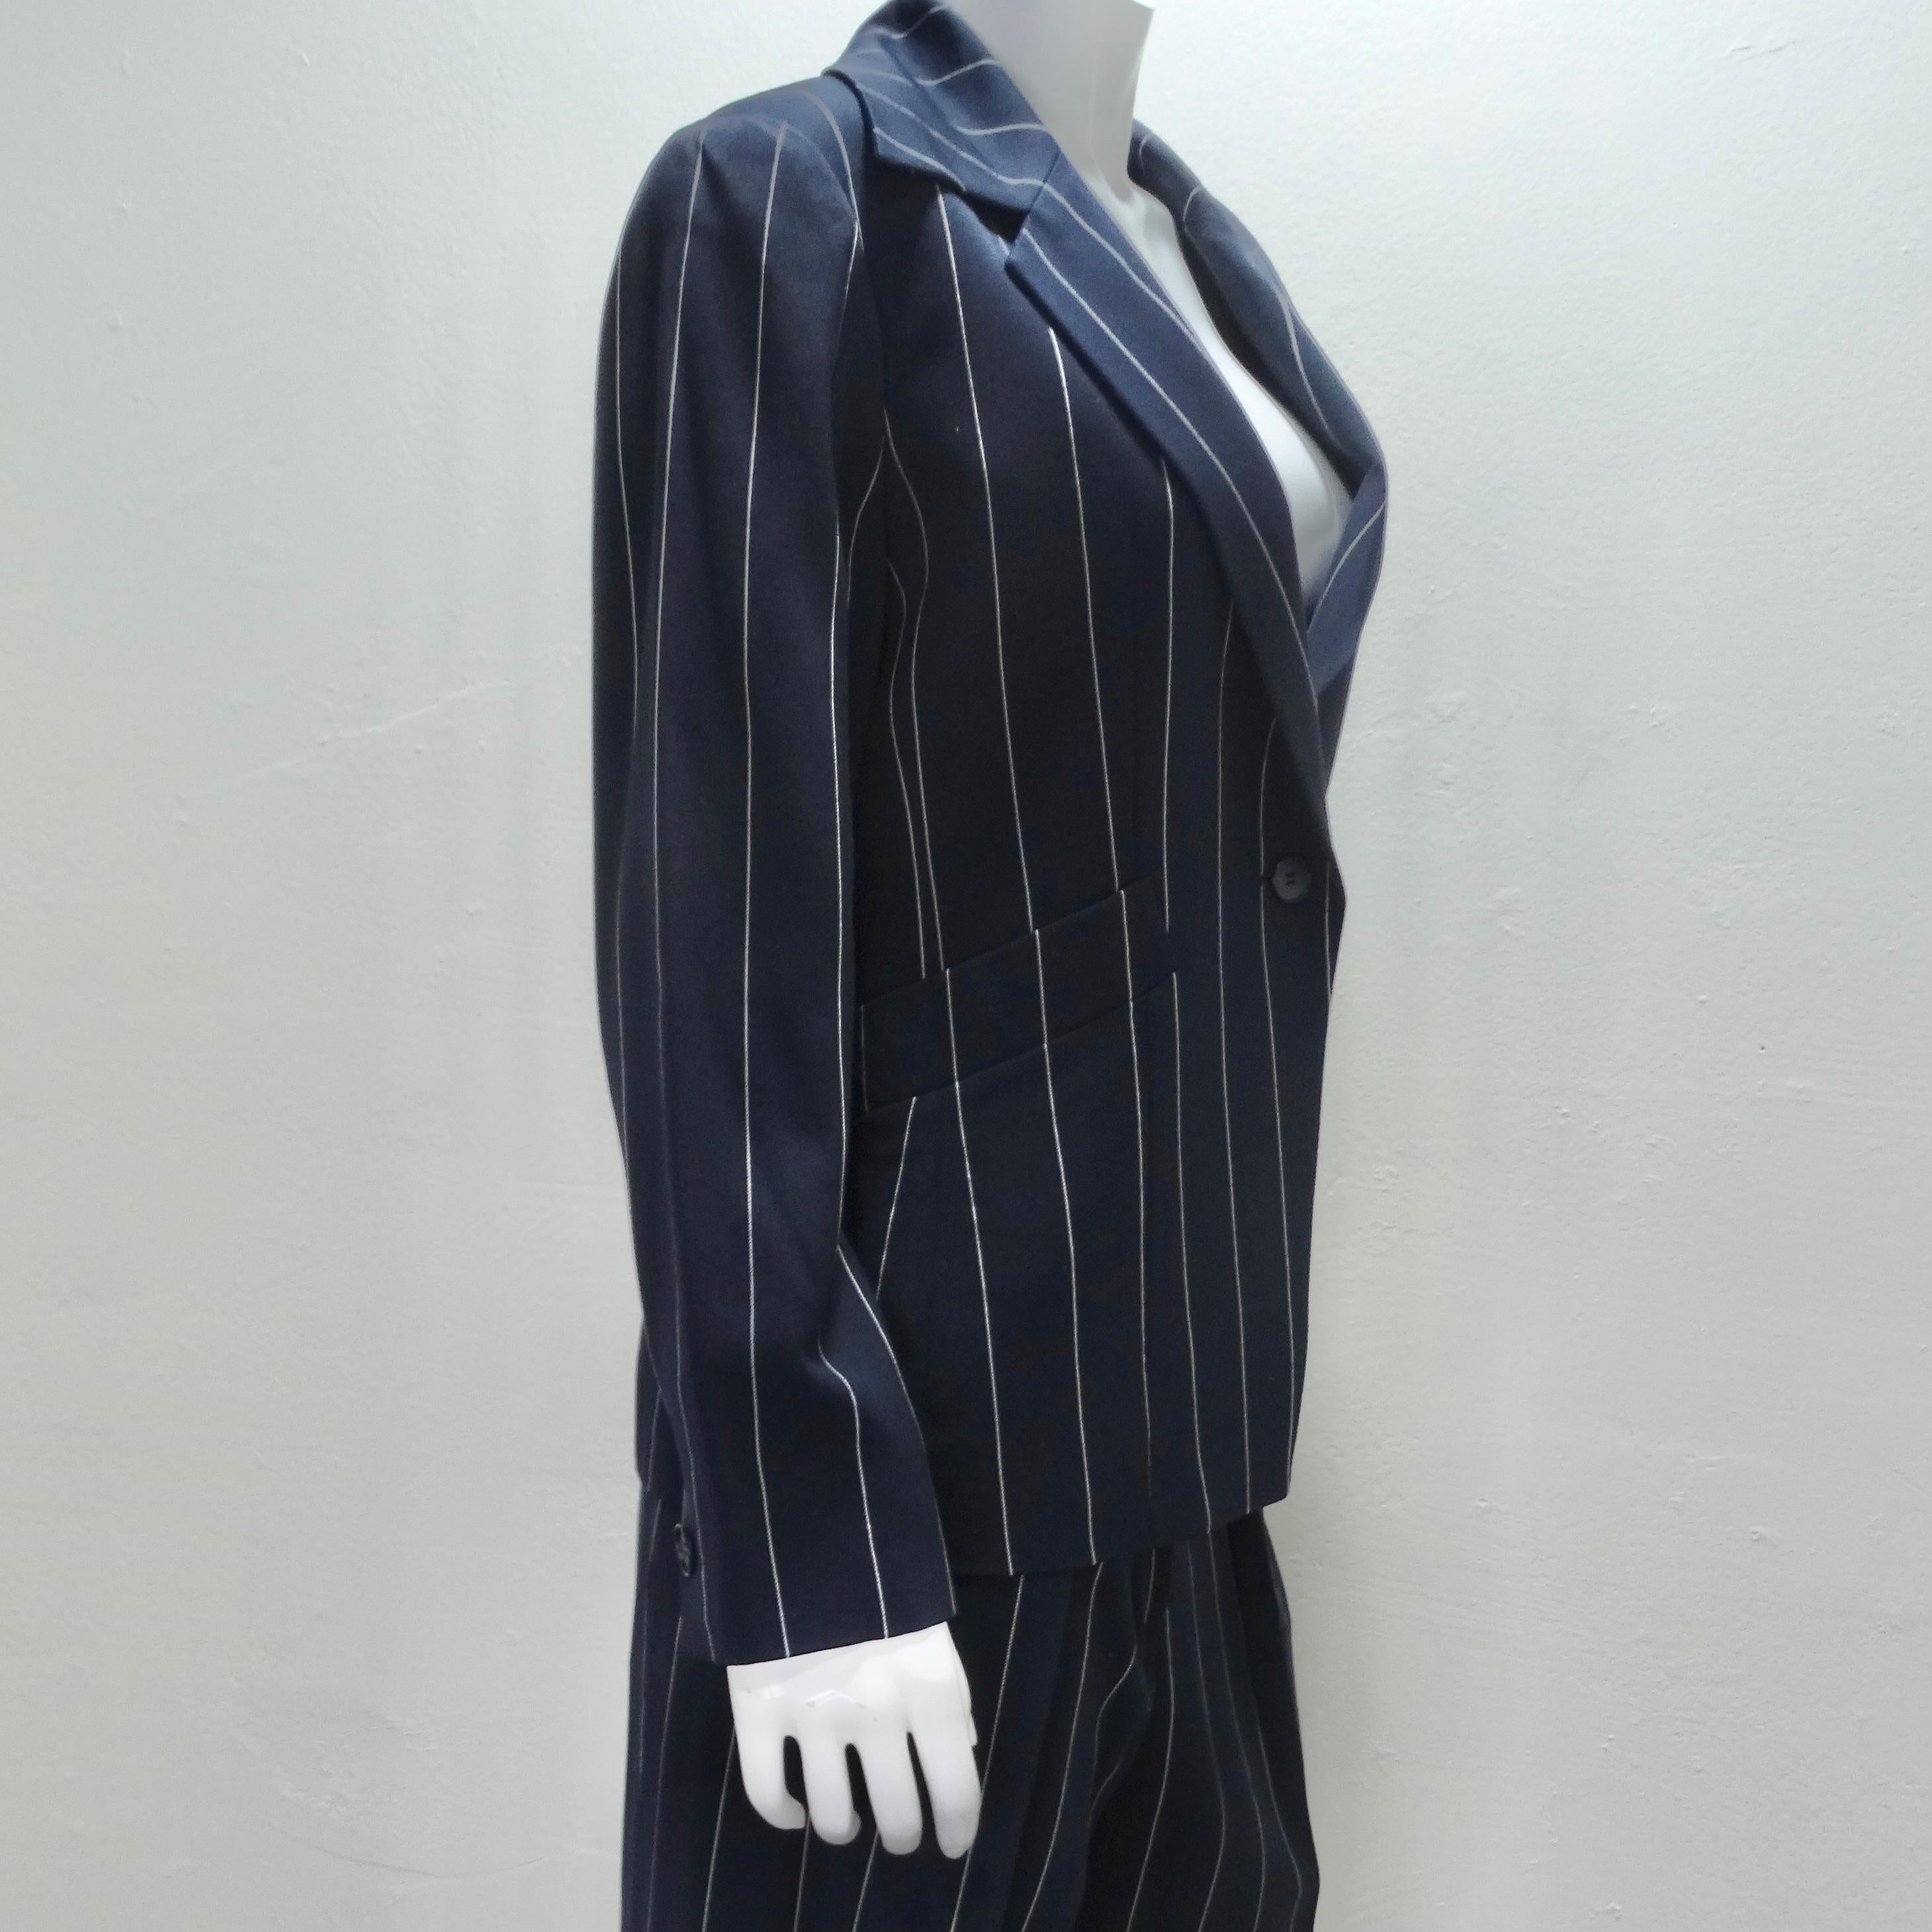 Christian Dior 1990s Navy Pinstripe Suit For Sale 8